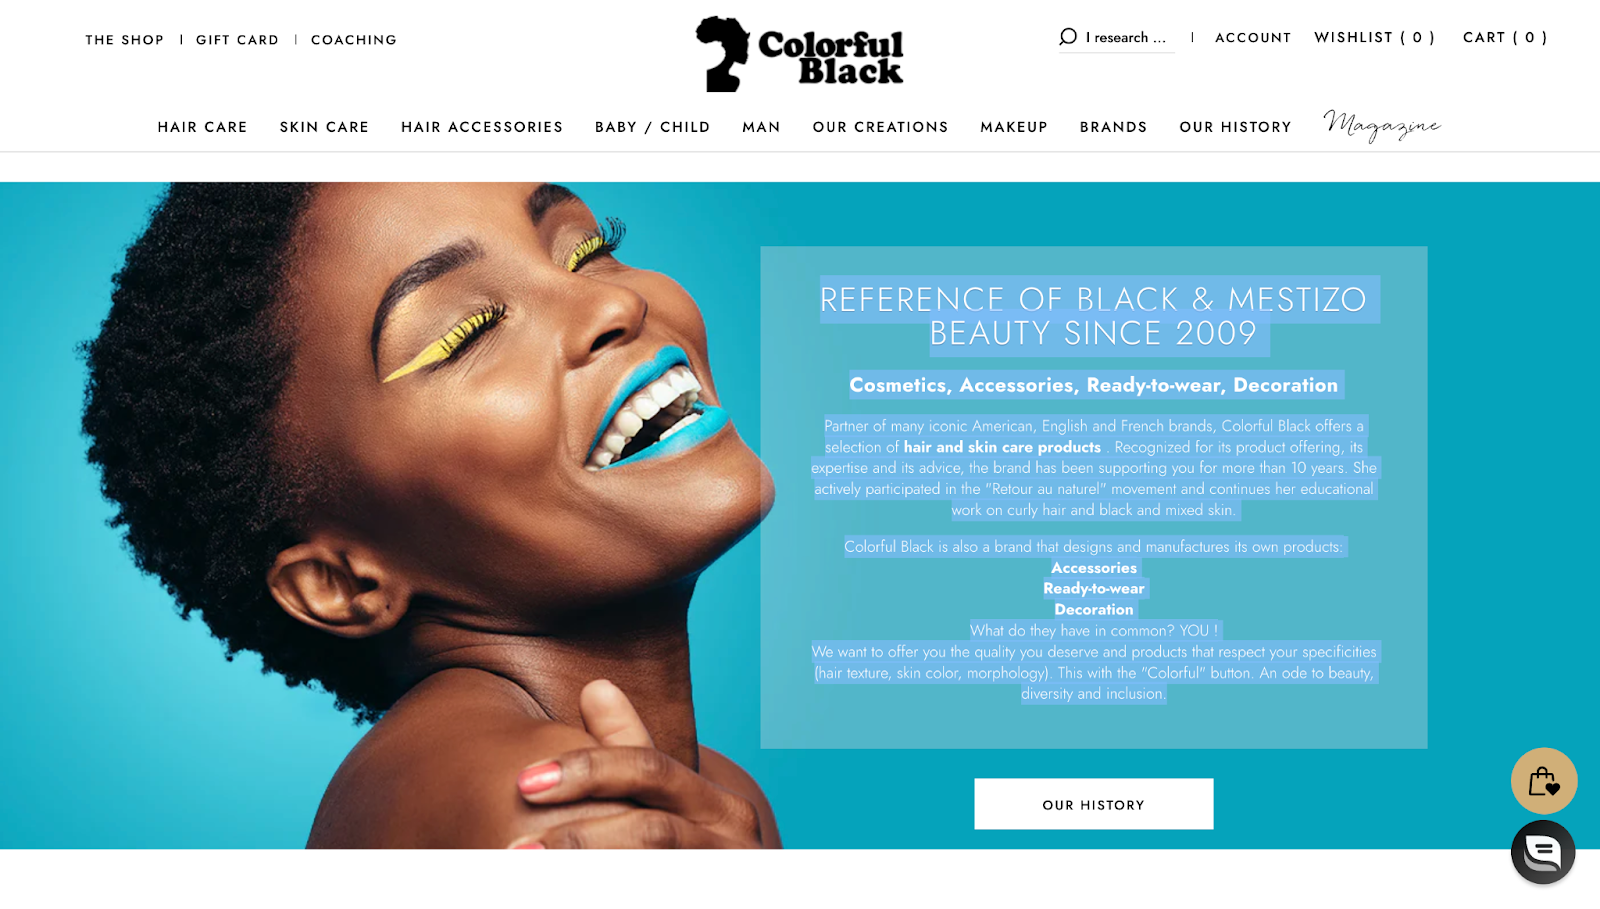 Mental Wellness Brands for World Mental Health Day–A screenshot of Colorful Black’s homepage showing a black woman smiling with yellow eyeliner and blue lipstick on a blue background. The text reads, “REFERENCE OF BLACK & MESTIZO BEAUTY SINCE 2009 Cosmetics, Accessories, Ready-to-wear, Decoration. Partner of many iconic American, English and French brands, Colorful Black offers a selection of hair and skin care products . Recognized for its product offering, its expertise and its advice, the brand has been supporting you for more than 10 years. She actively participated in the "Retour au naturel" movement and continues her educational work on curly hair and black and mixed skin.Colorful Black is also a brand that designs and manufactures its own products: Accessories, Ready-to-wear, Decoration. What do they have in common? YOU! We want to offer you the quality you deserve and products that respect your specificities (hair texture, skin color, morphology). This with the "Colorful" button. An ode to beauty, diversity and inclusion.”